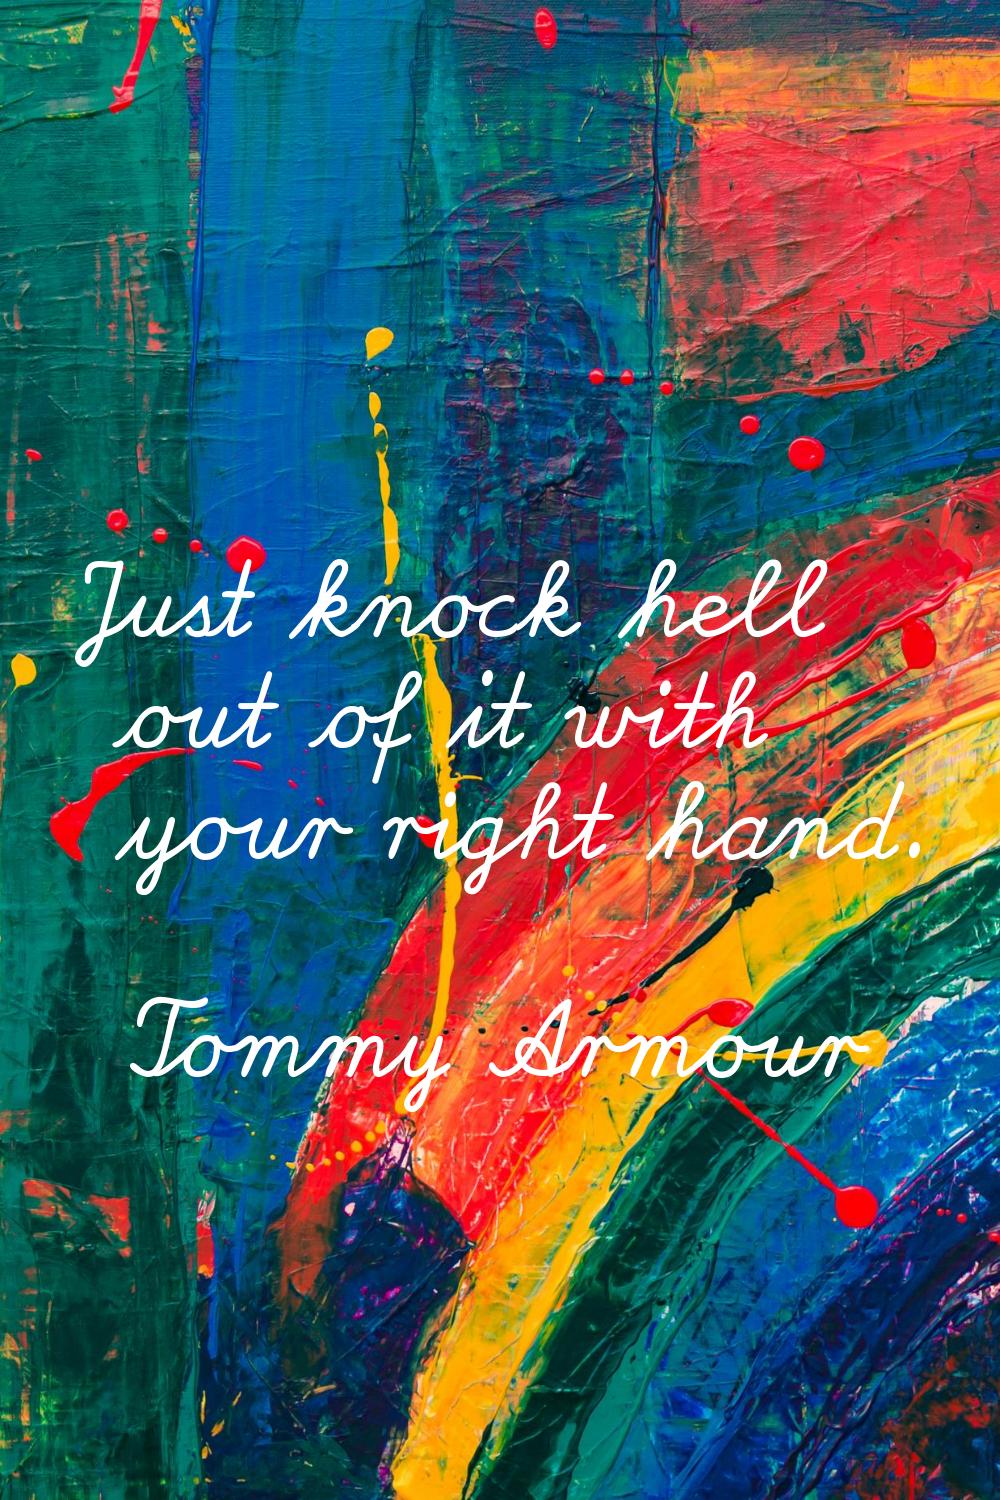 Just knock hell out of it with your right hand.